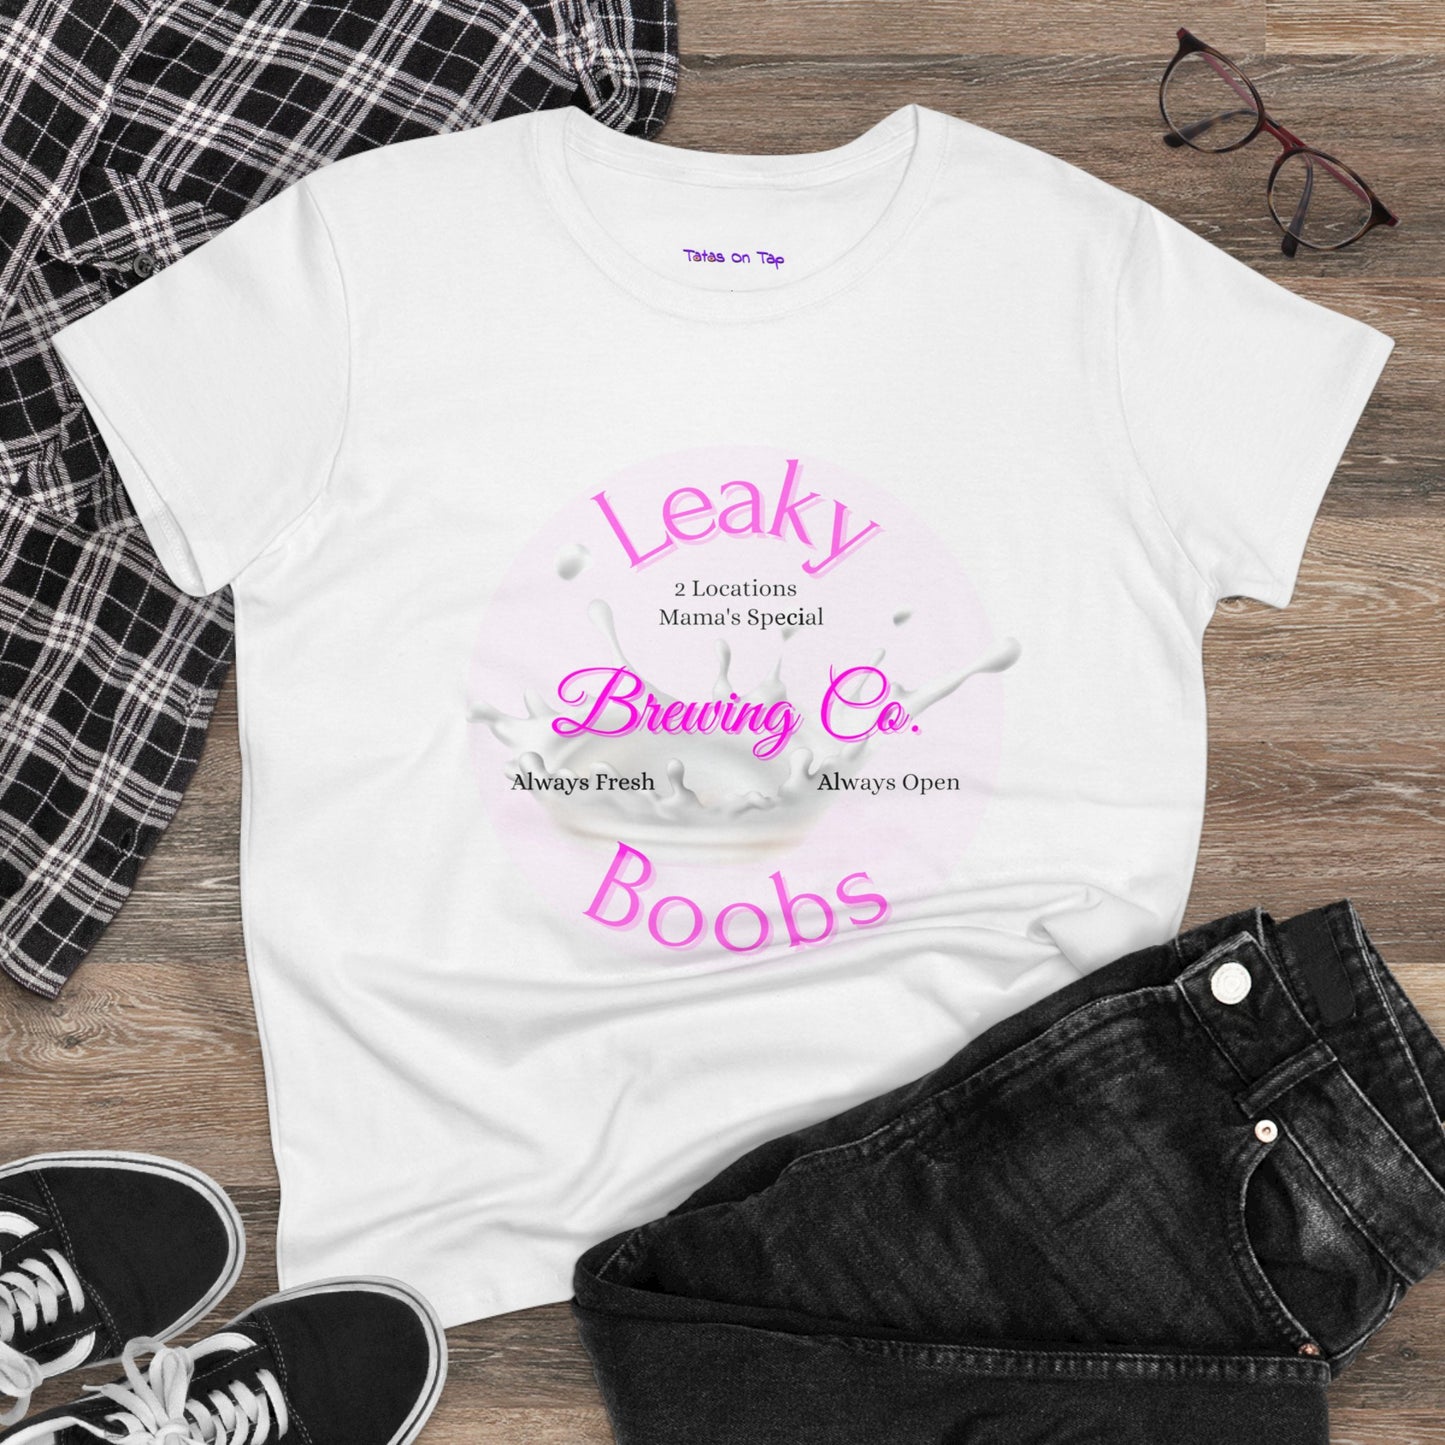 Leaky Boobs On Tap!